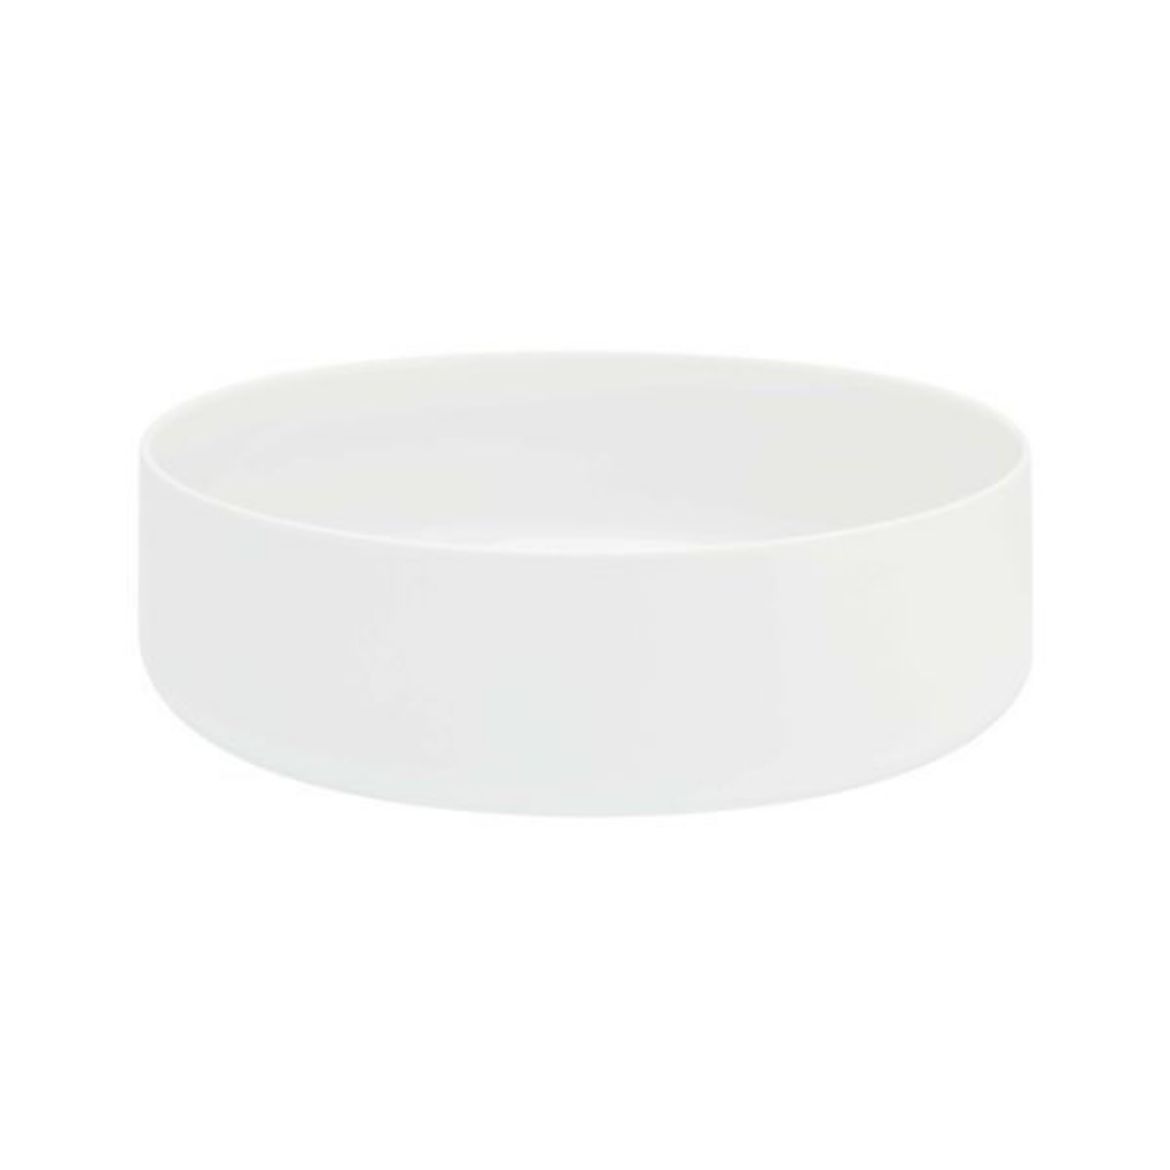 Picture of Silkroad White Salad Bowl